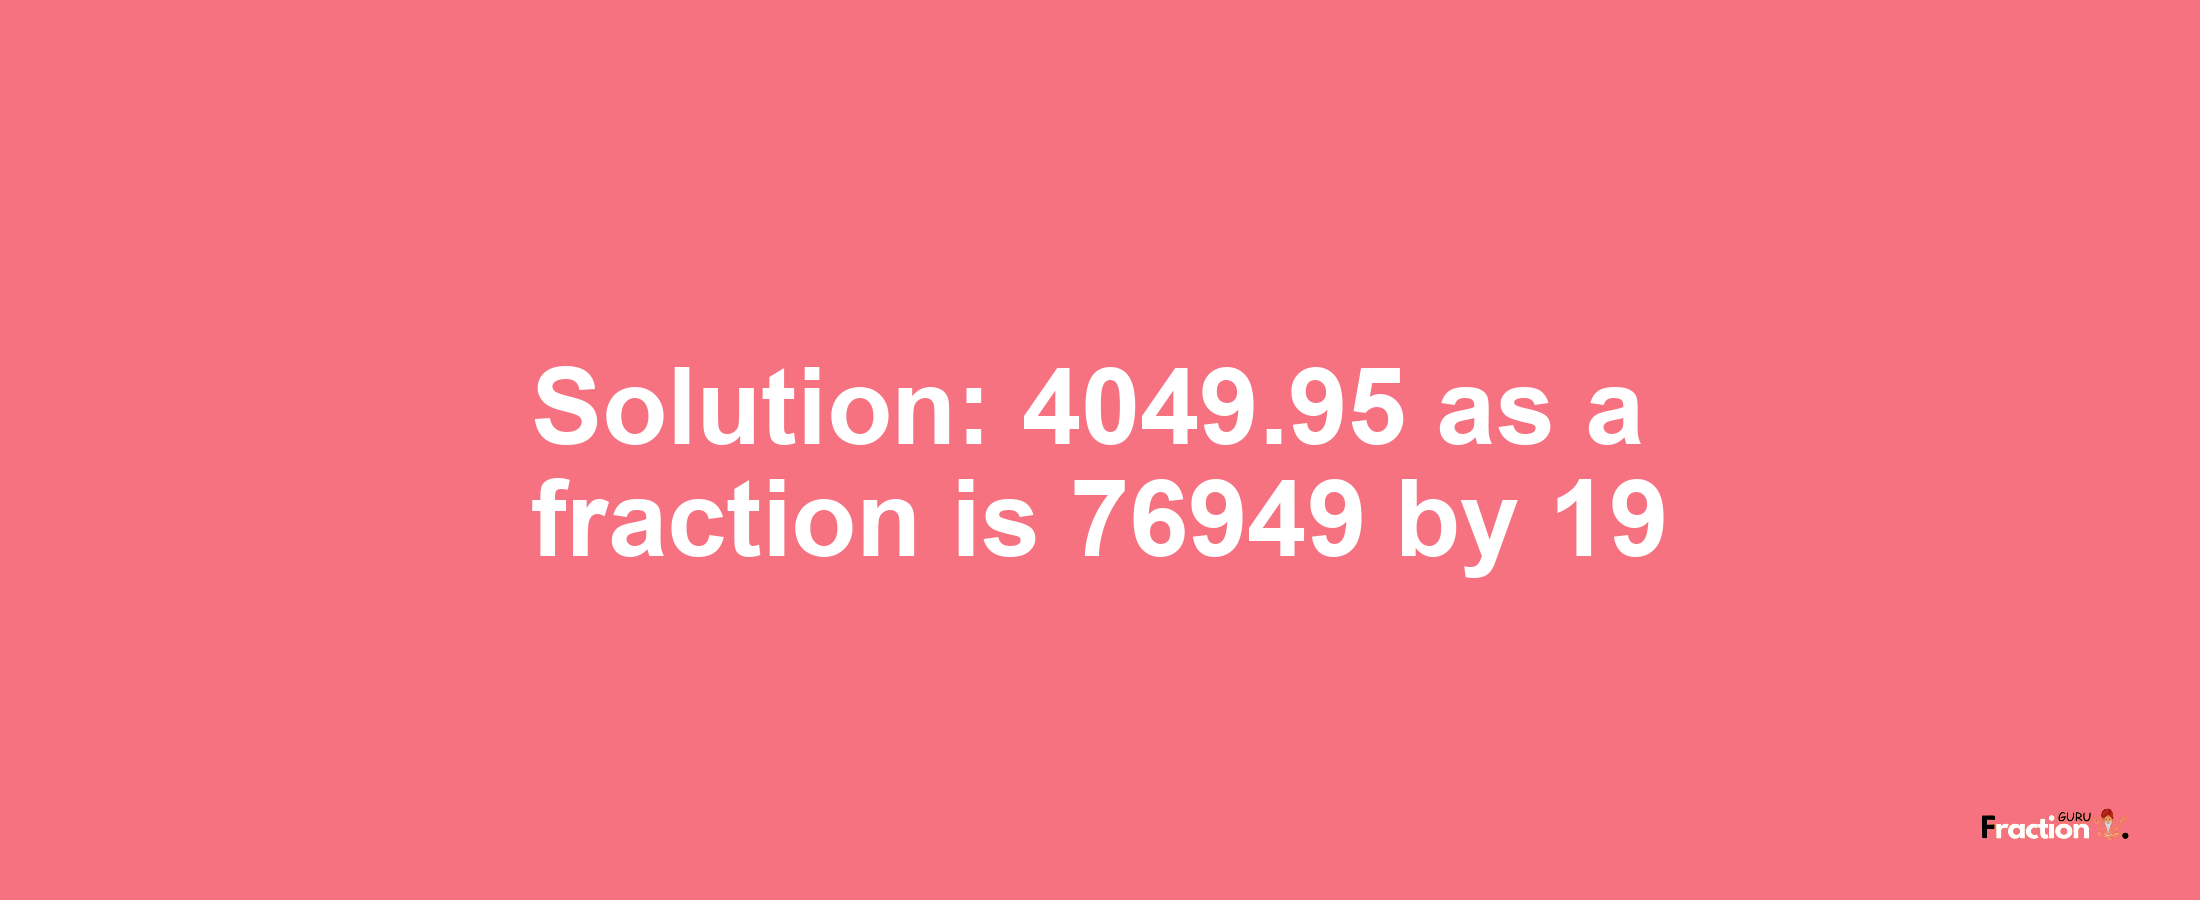 Solution:4049.95 as a fraction is 76949/19